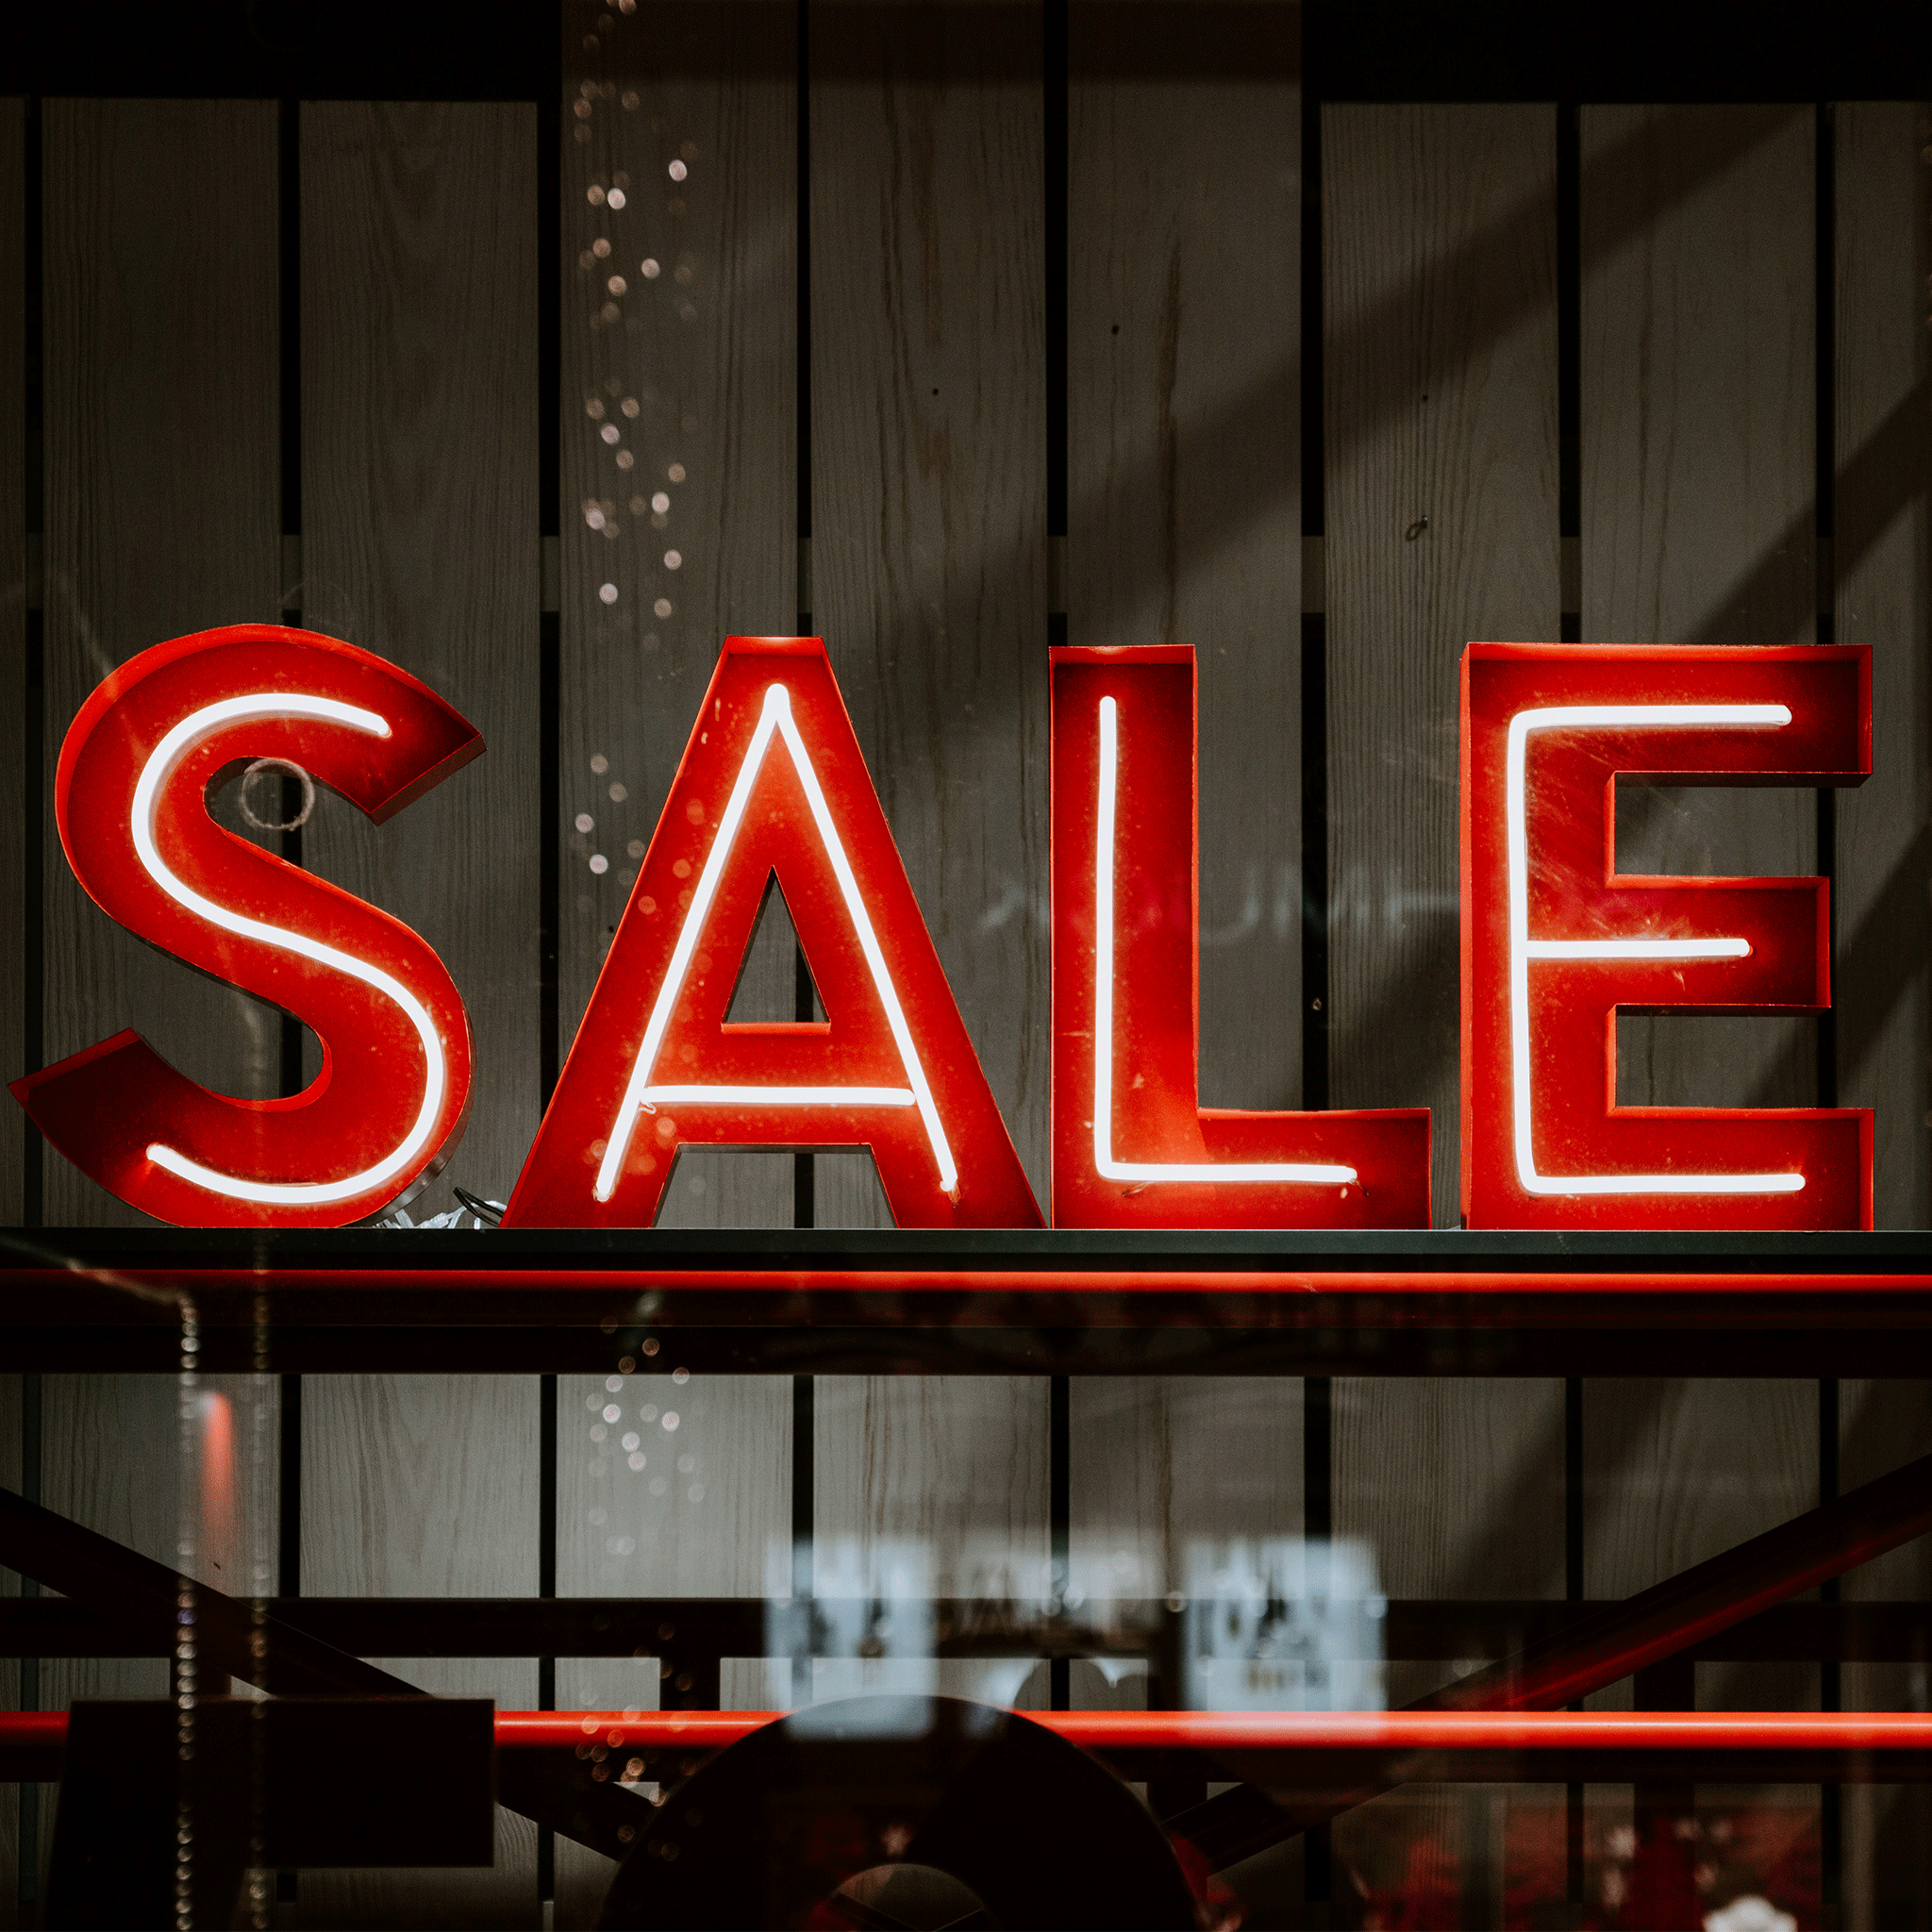 Red sale sign in window